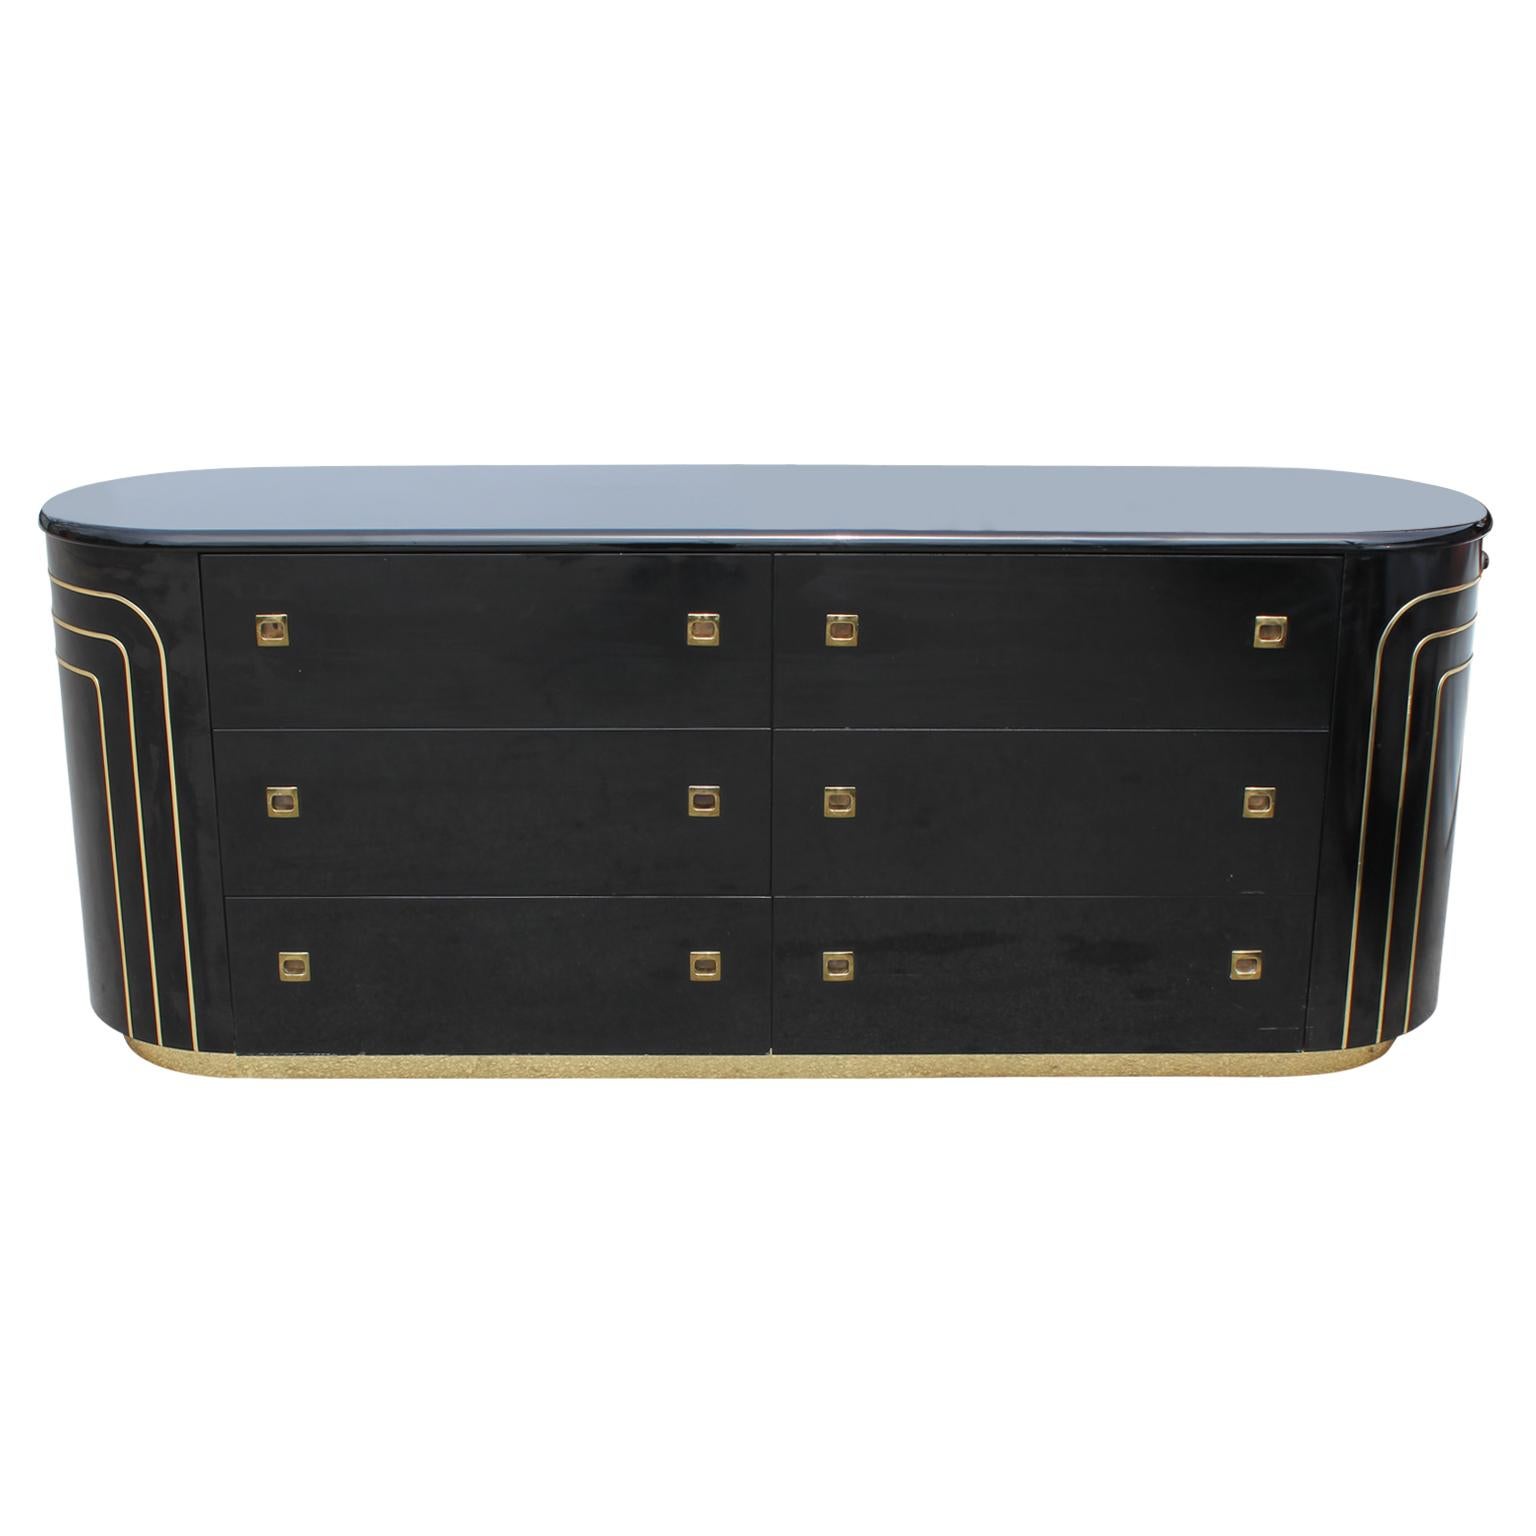 Lovely modern black lacquer rounded dresser with eight drawers featuring a brass base and brass detailing.